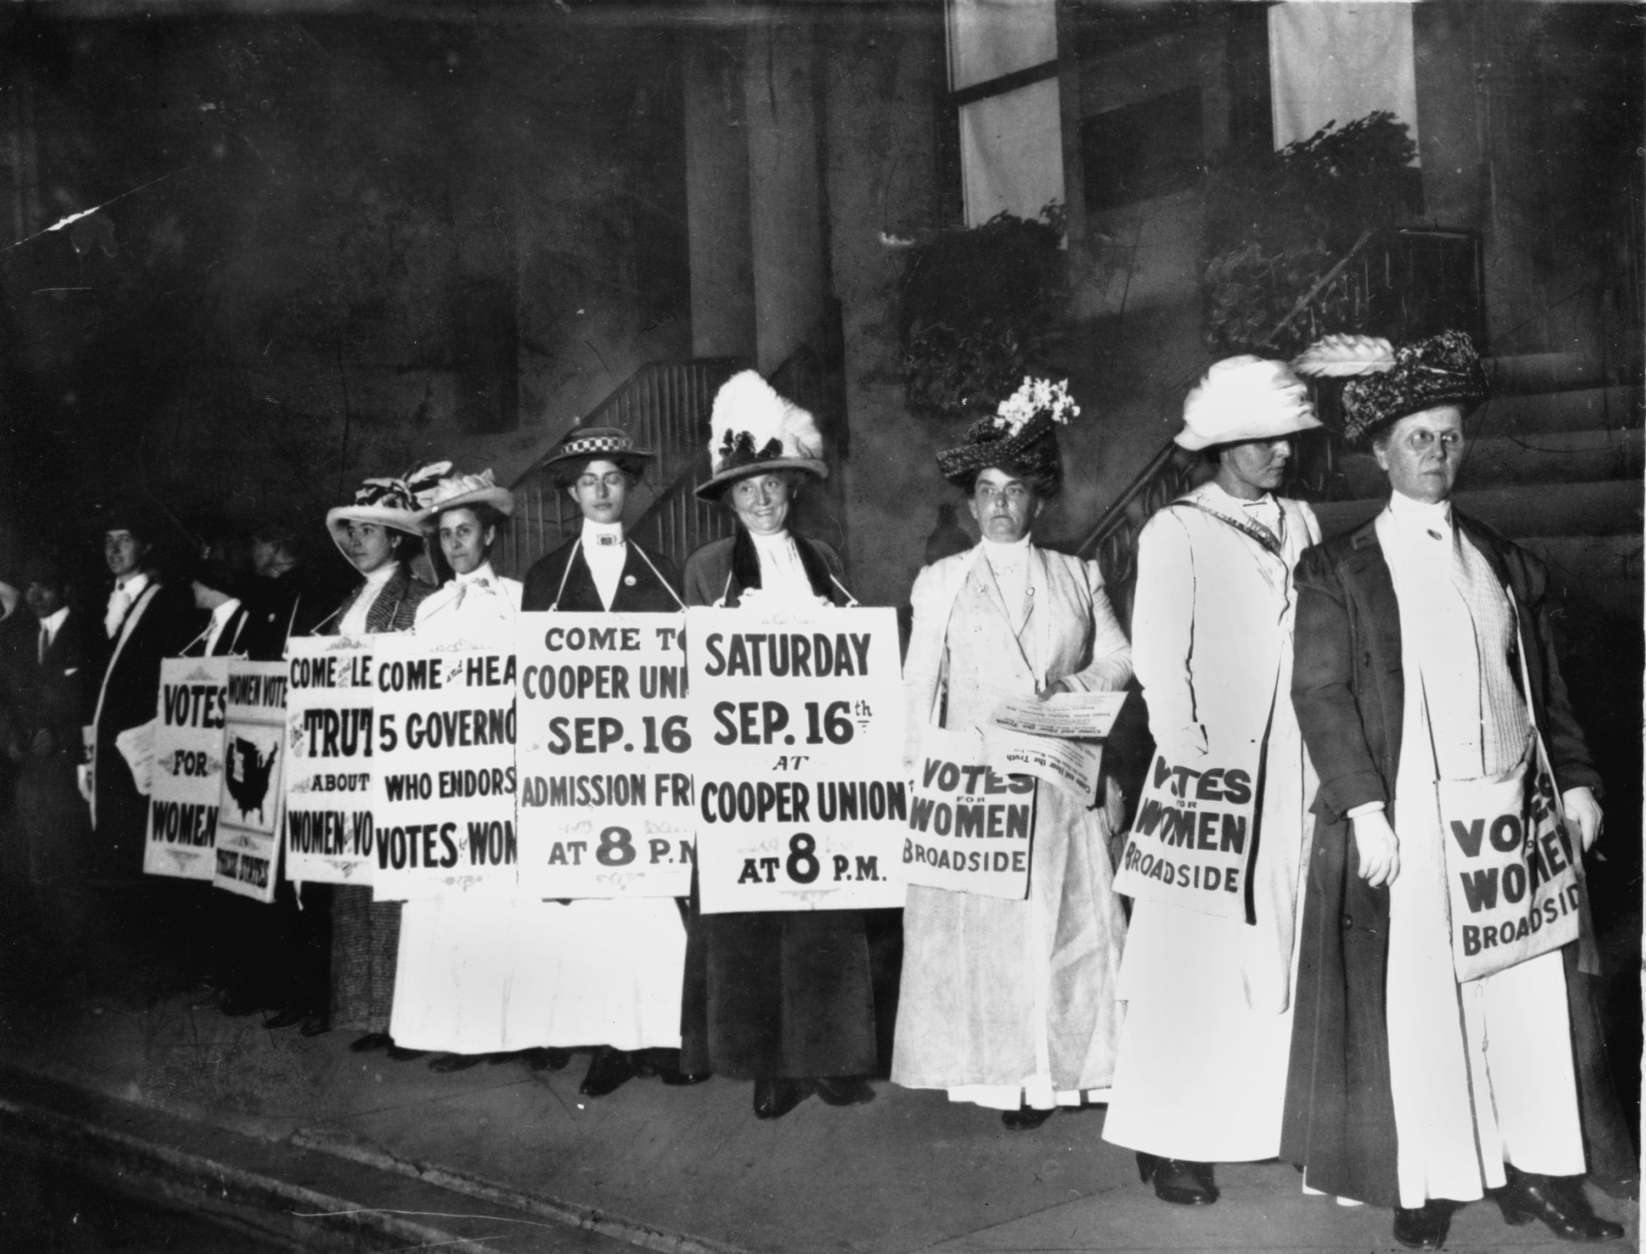 A line of women rally for women's suffrage and advertise a free rally discussing women's right to vote in Washington D.C. on Oct. 3, 1915.  (AP Photo)